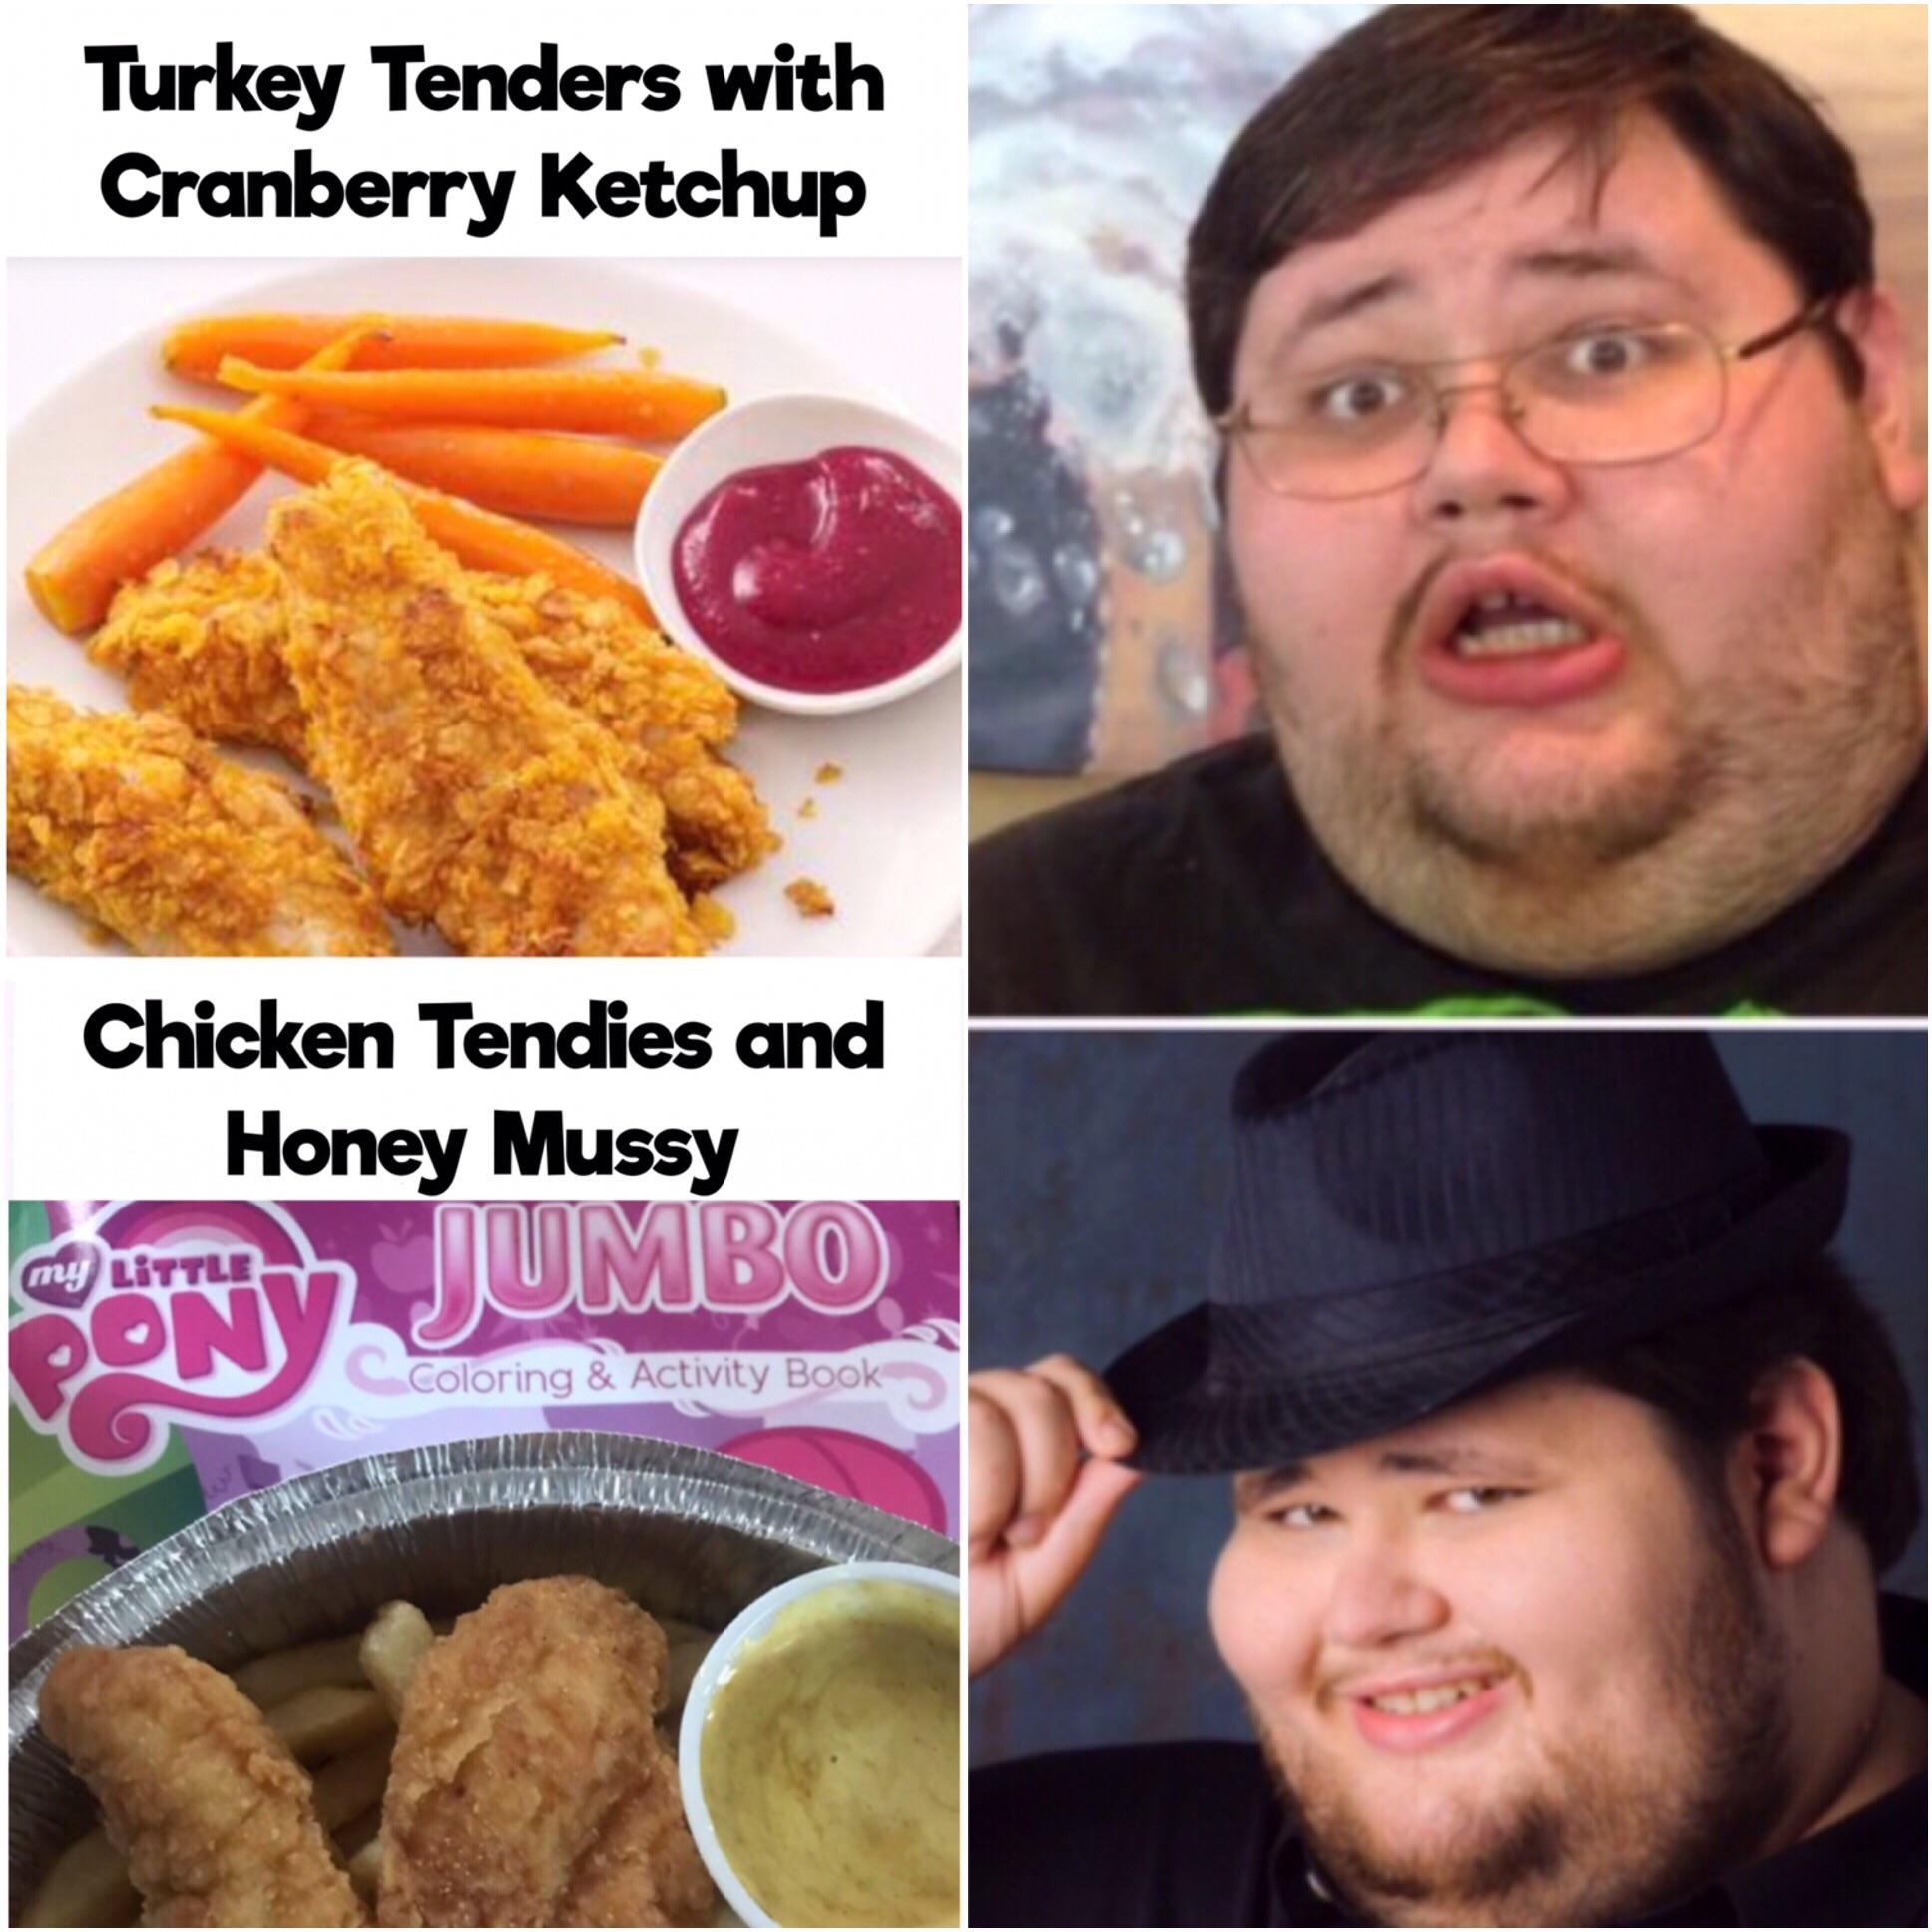 junk food - Turkey Tenders with Cranberry Ketchup Chicken Tendies and Honey Mussy E Jumbo Coloring & Activity Book